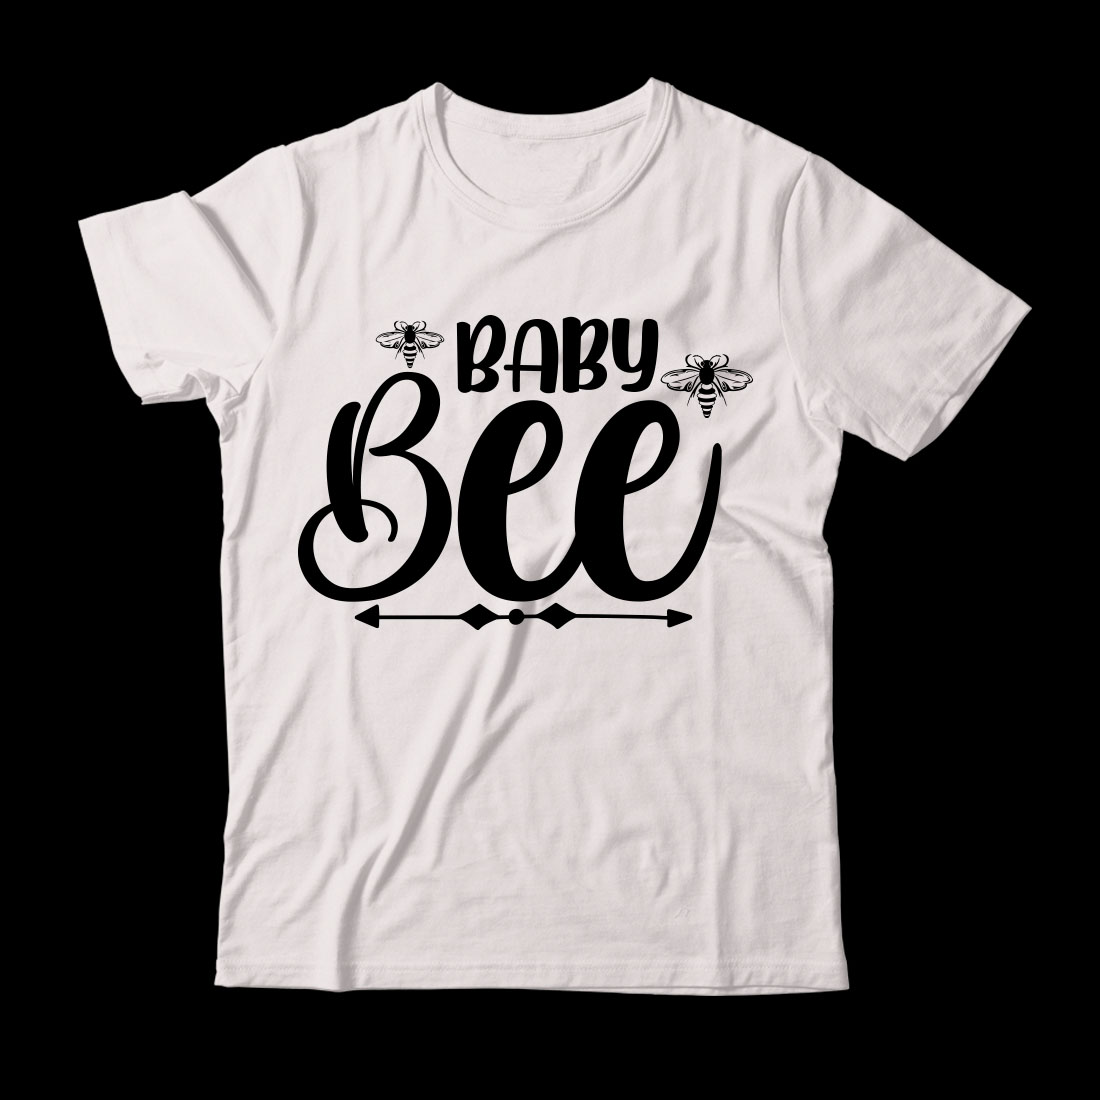 White shirt with the words baby bee on it.